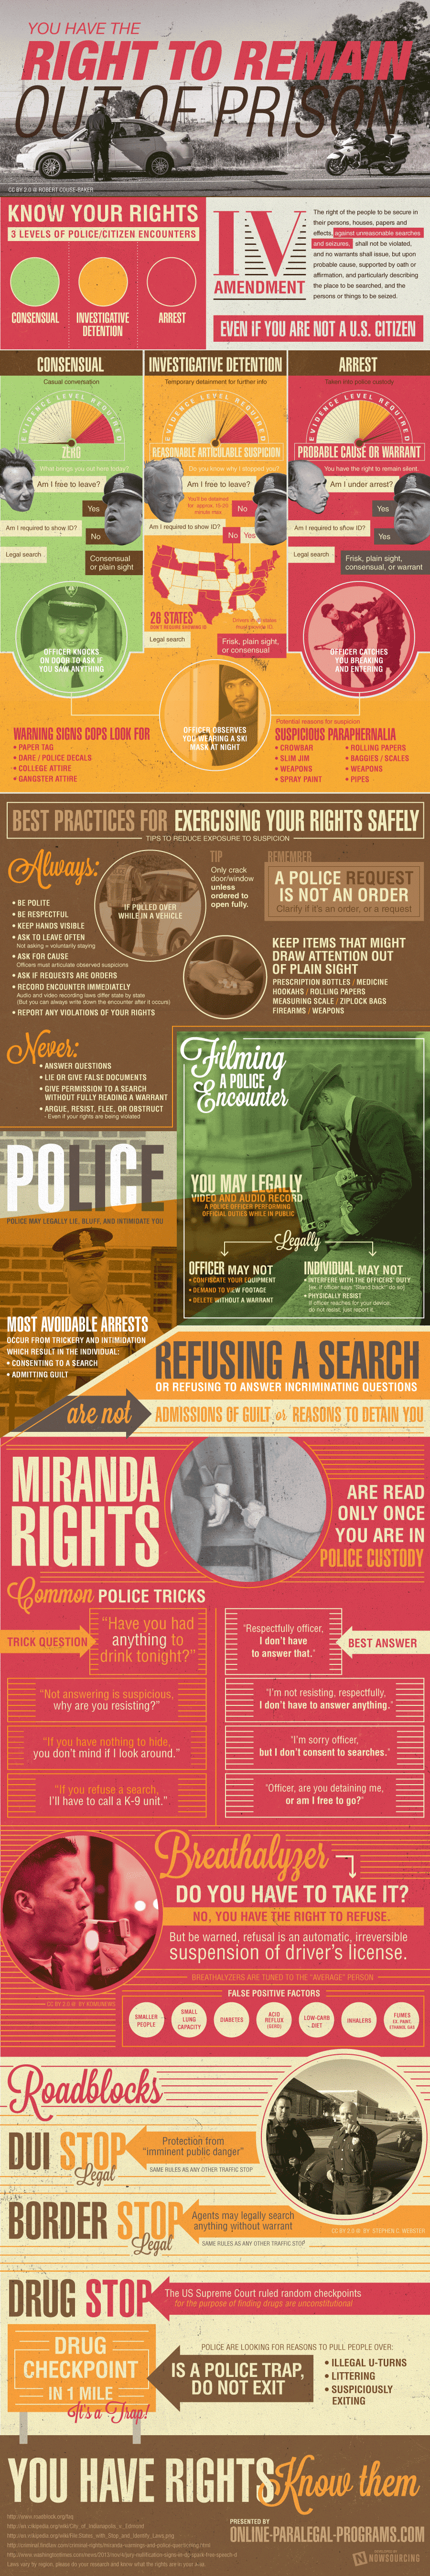 How To Handle Encounters With The Police (INFOGRAPHIC)